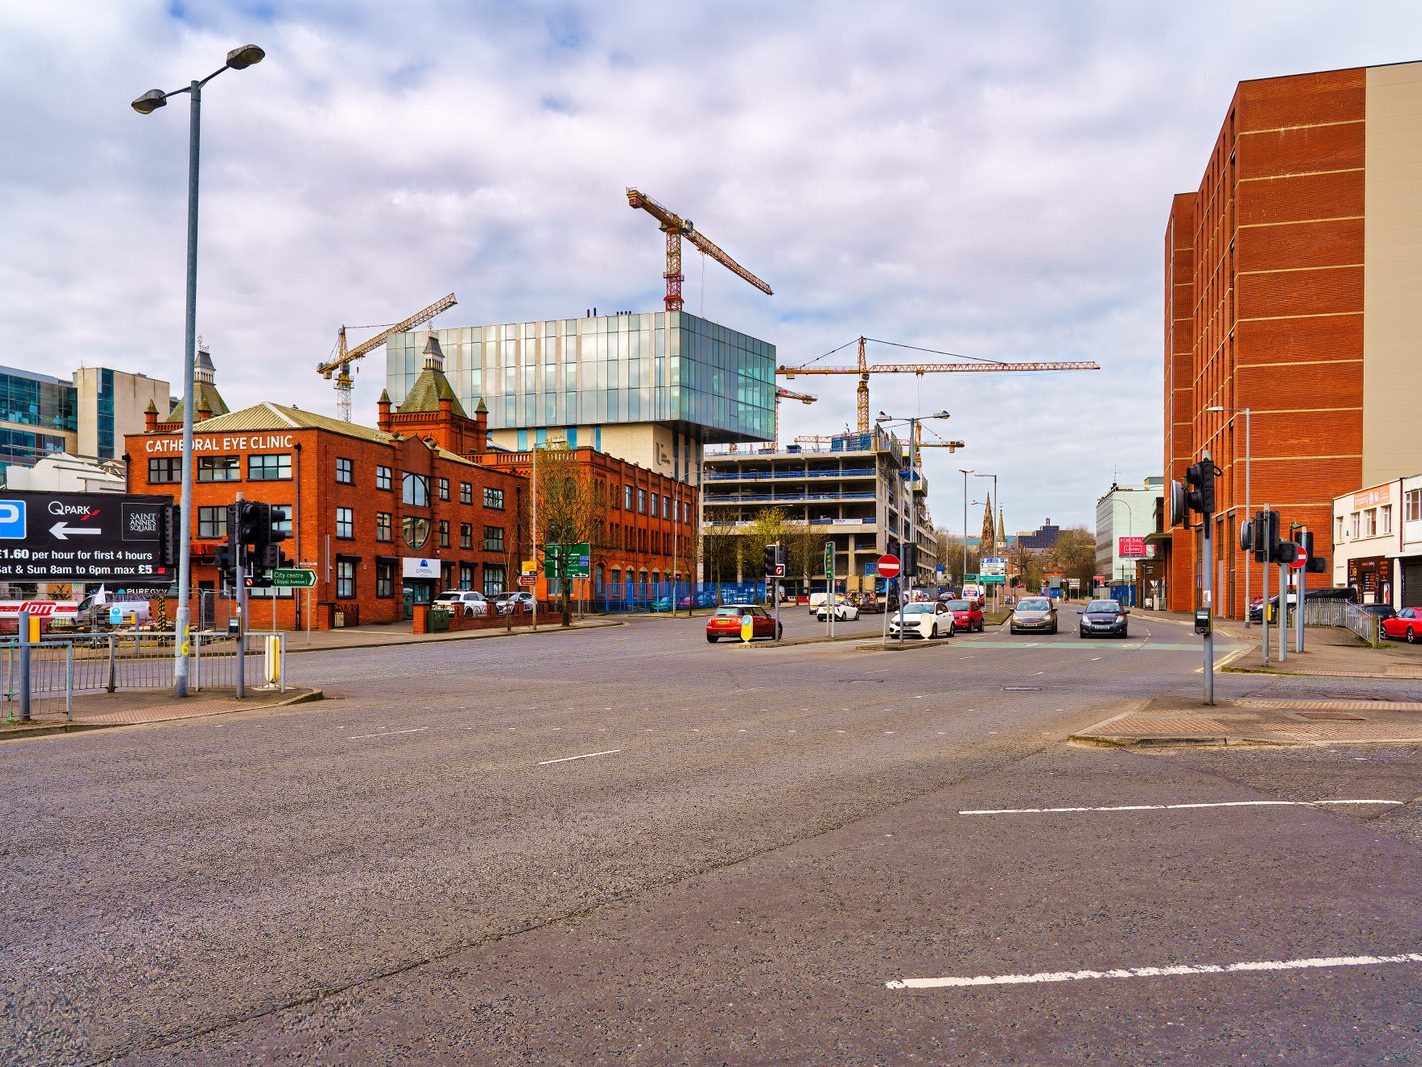 NEW ULSTER UNIVERSITY CAMPUS IN BELFAST [WAS VERY MUCH A WORK IN PROGRESS IN MARCH 2019]-224615-1